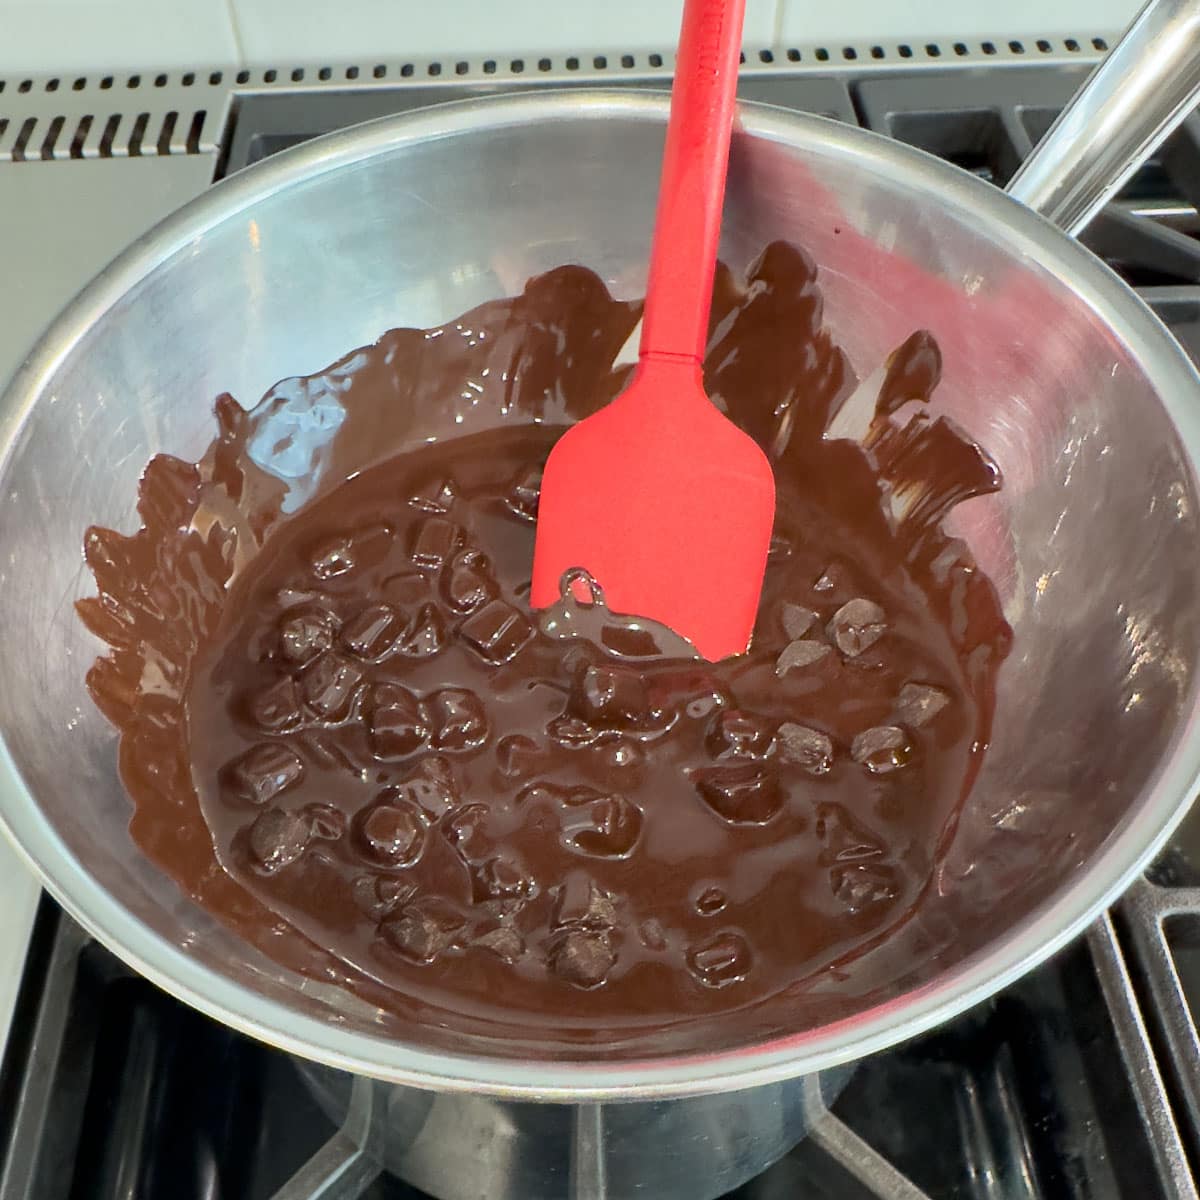 Melting chocolate in a double boiler on the stovetop.